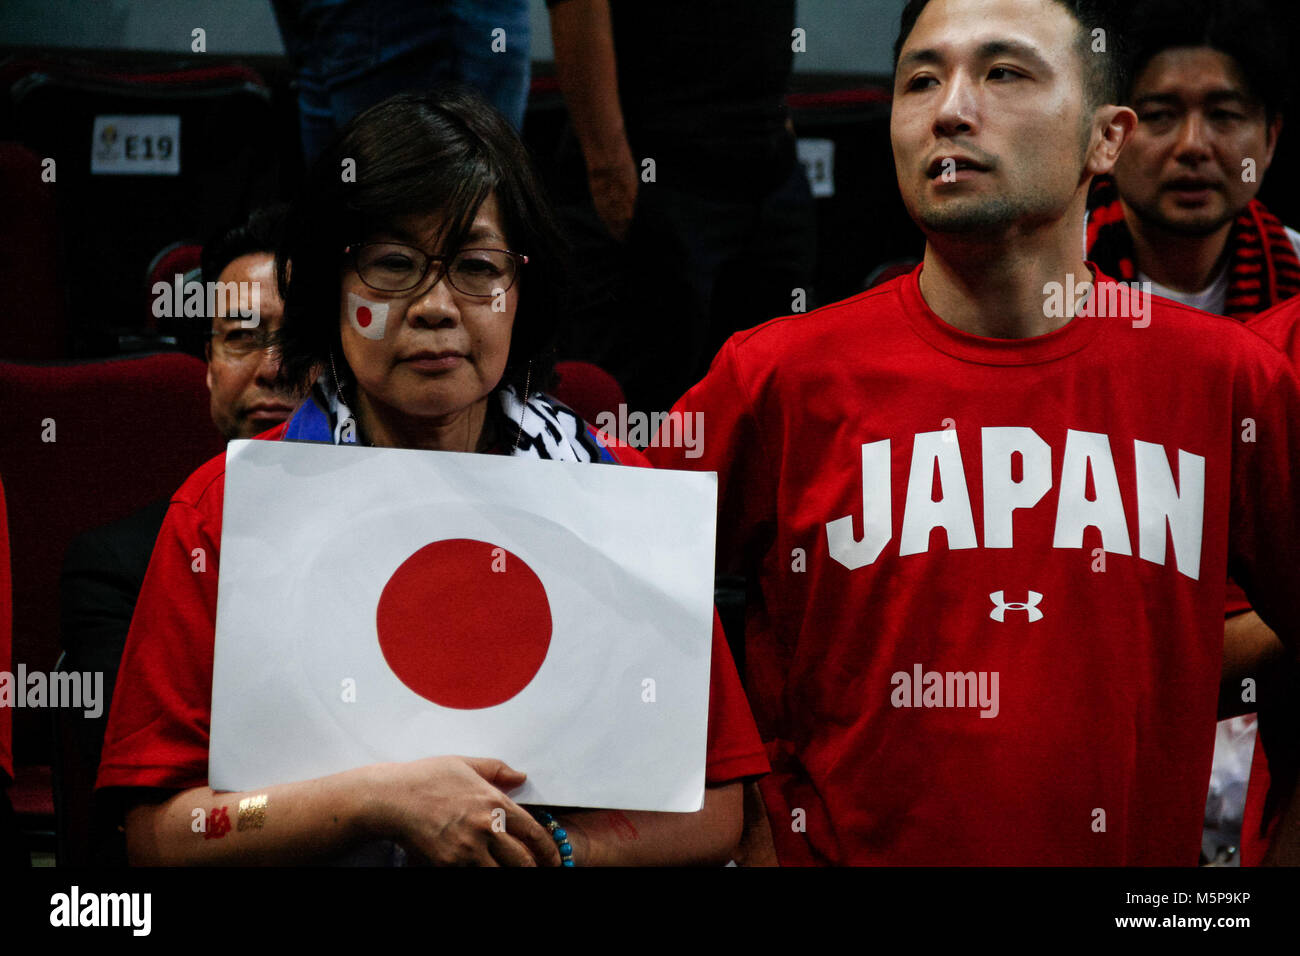 Philippines. 25th Feb, 2018. Japanese fans during the qualifying game at the MOA Arena.The Philippine and Japanese basketball team met at the hardcourt of the Mall of Asia Arena in Pasay City, for the FIBA World Cup 2019 Asian Qualifiers. The Philippines won over Japan, 89-84. Credit: J Gerard Seguia/ZUMA Wire/Alamy Live News Stock Photo